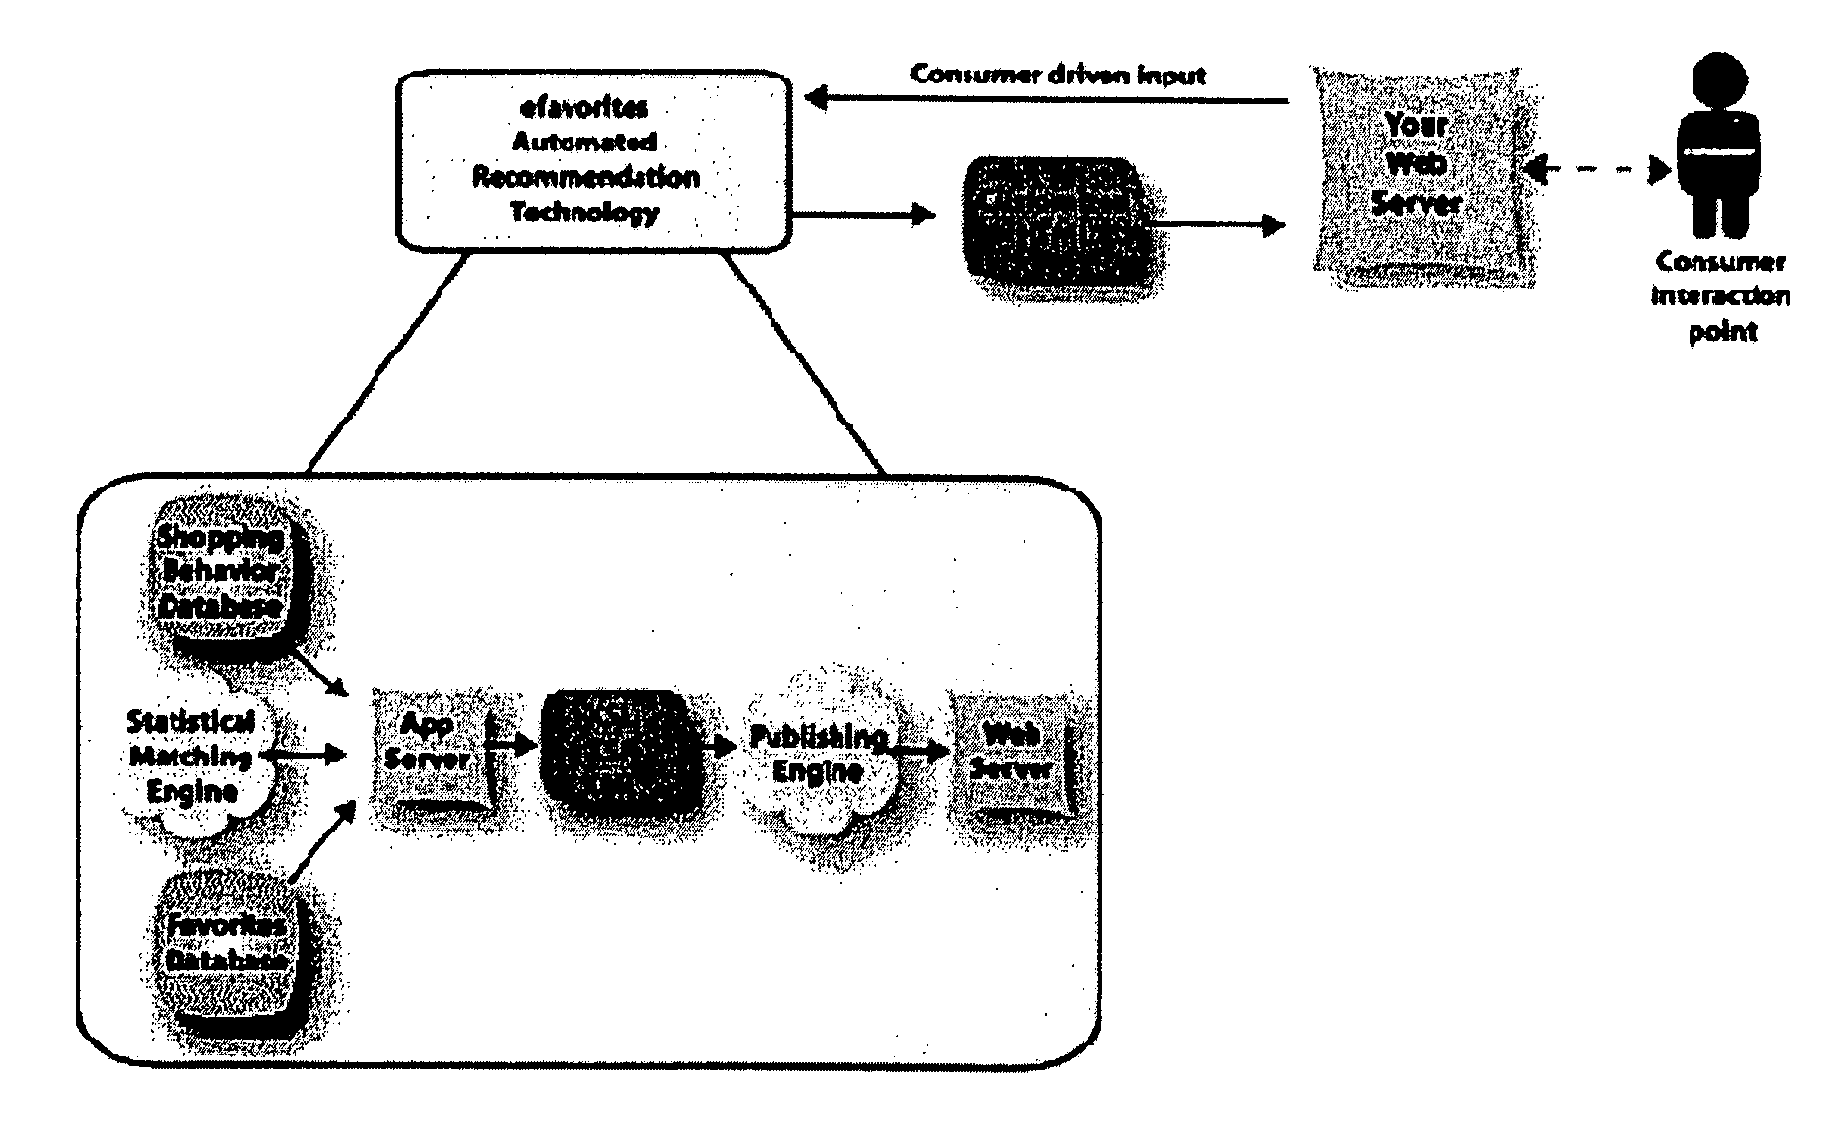 Internet-based system for dynamically creating and delivering customized content within remote web pages